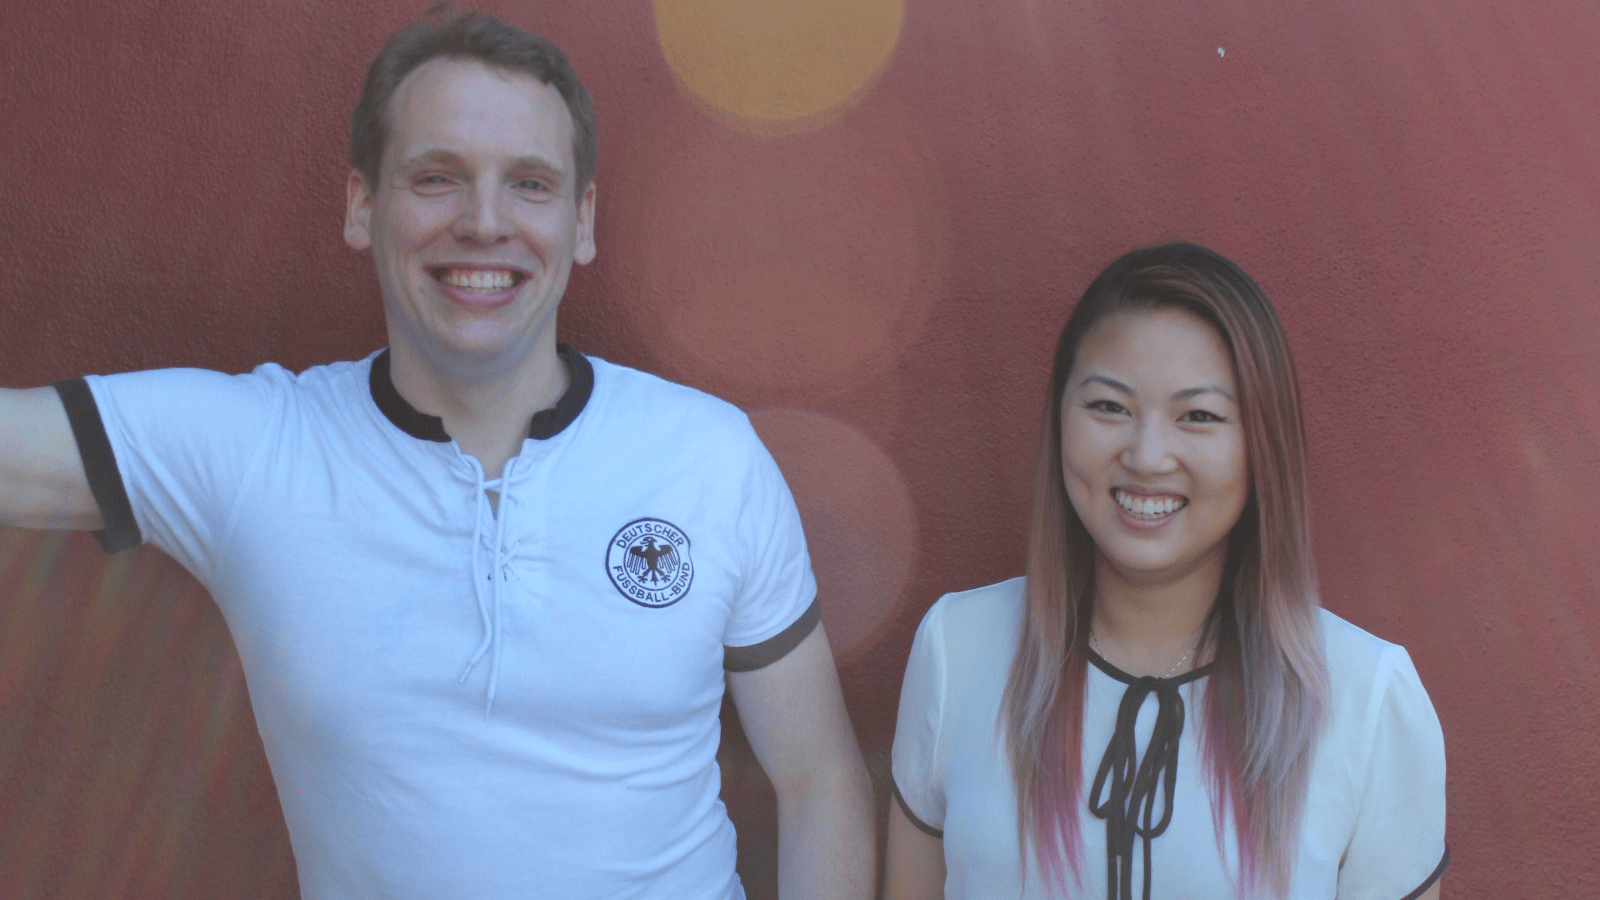 Philipp and Diane wearing white colored tops, smiling in front of a dark maroon wall